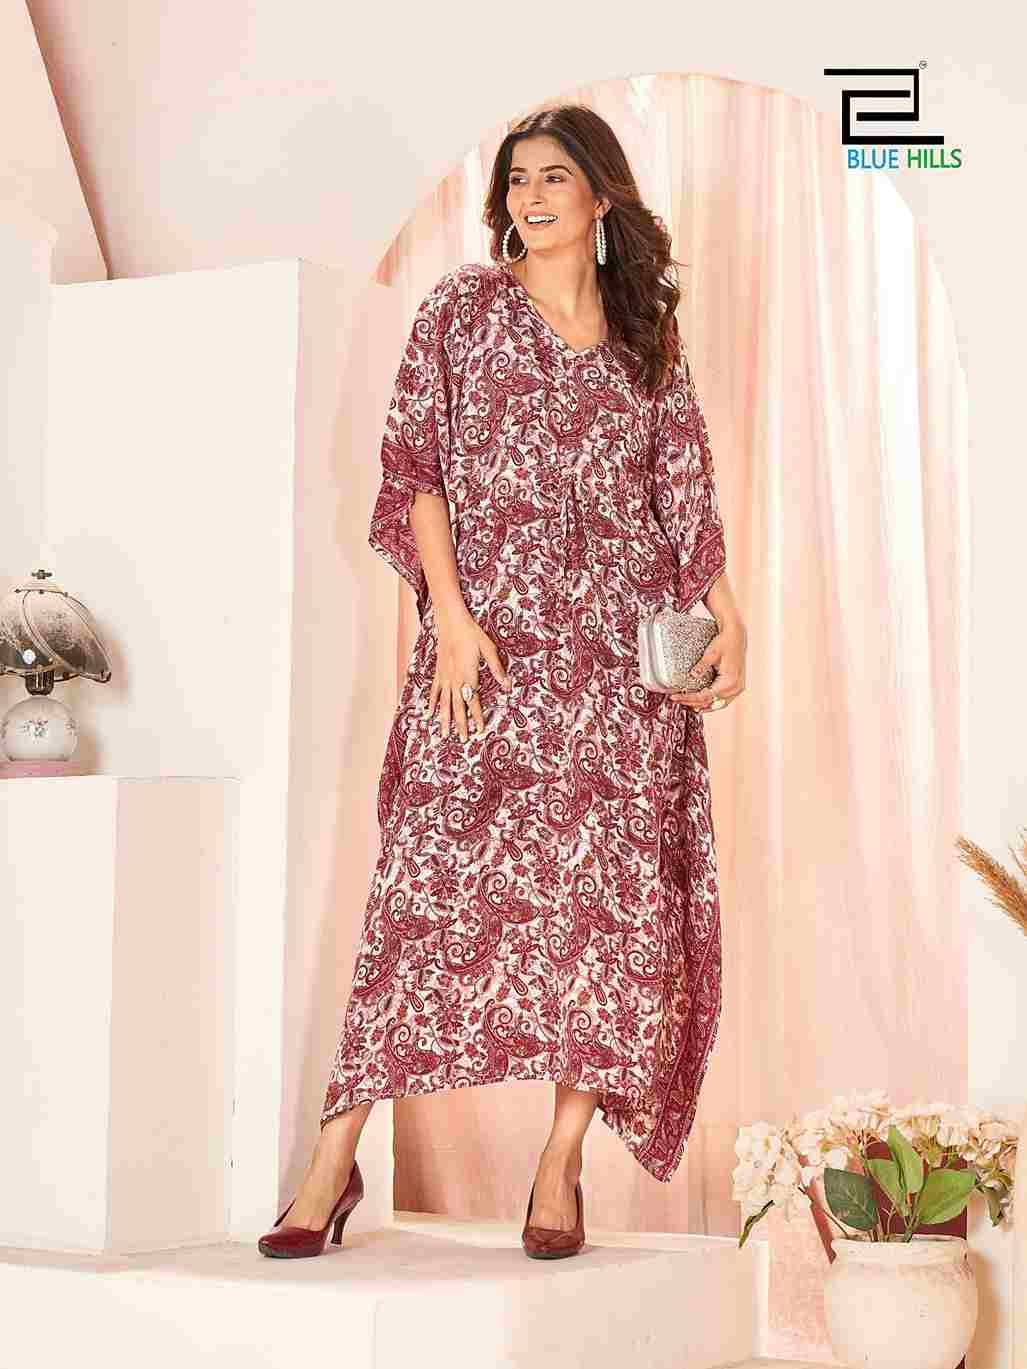 Fire walk Vol-10 By Blue Hills 10001 To 10004 Series Designer Stylish Fancy Colorful Beautiful Party Wear & Ethnic Wear Collection Heavy Crepe Print Kaftan At Wholesale Price